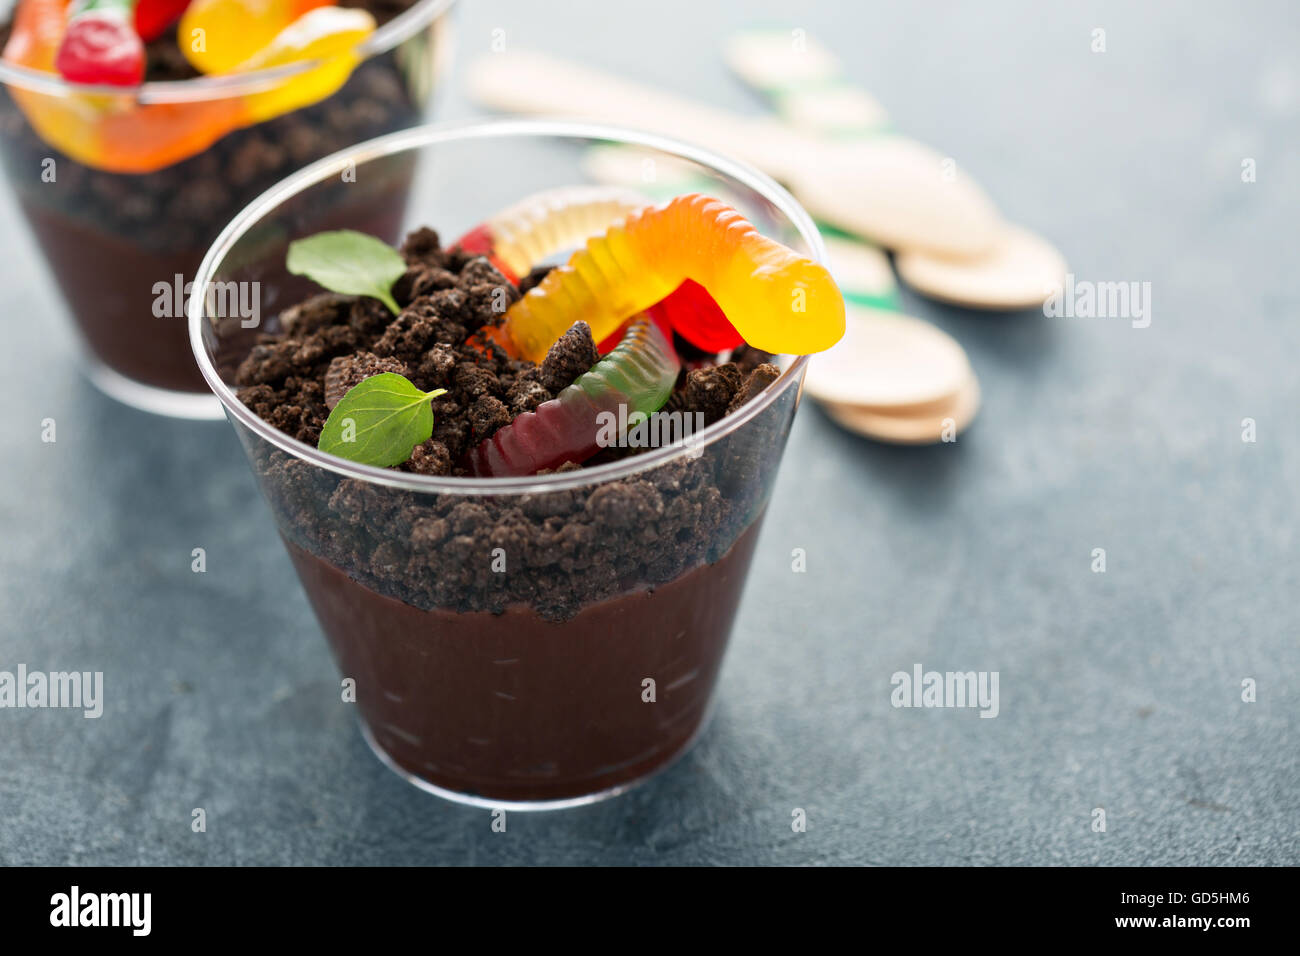 Children chocolate dessert in a cup dirt and worms Stock Photo